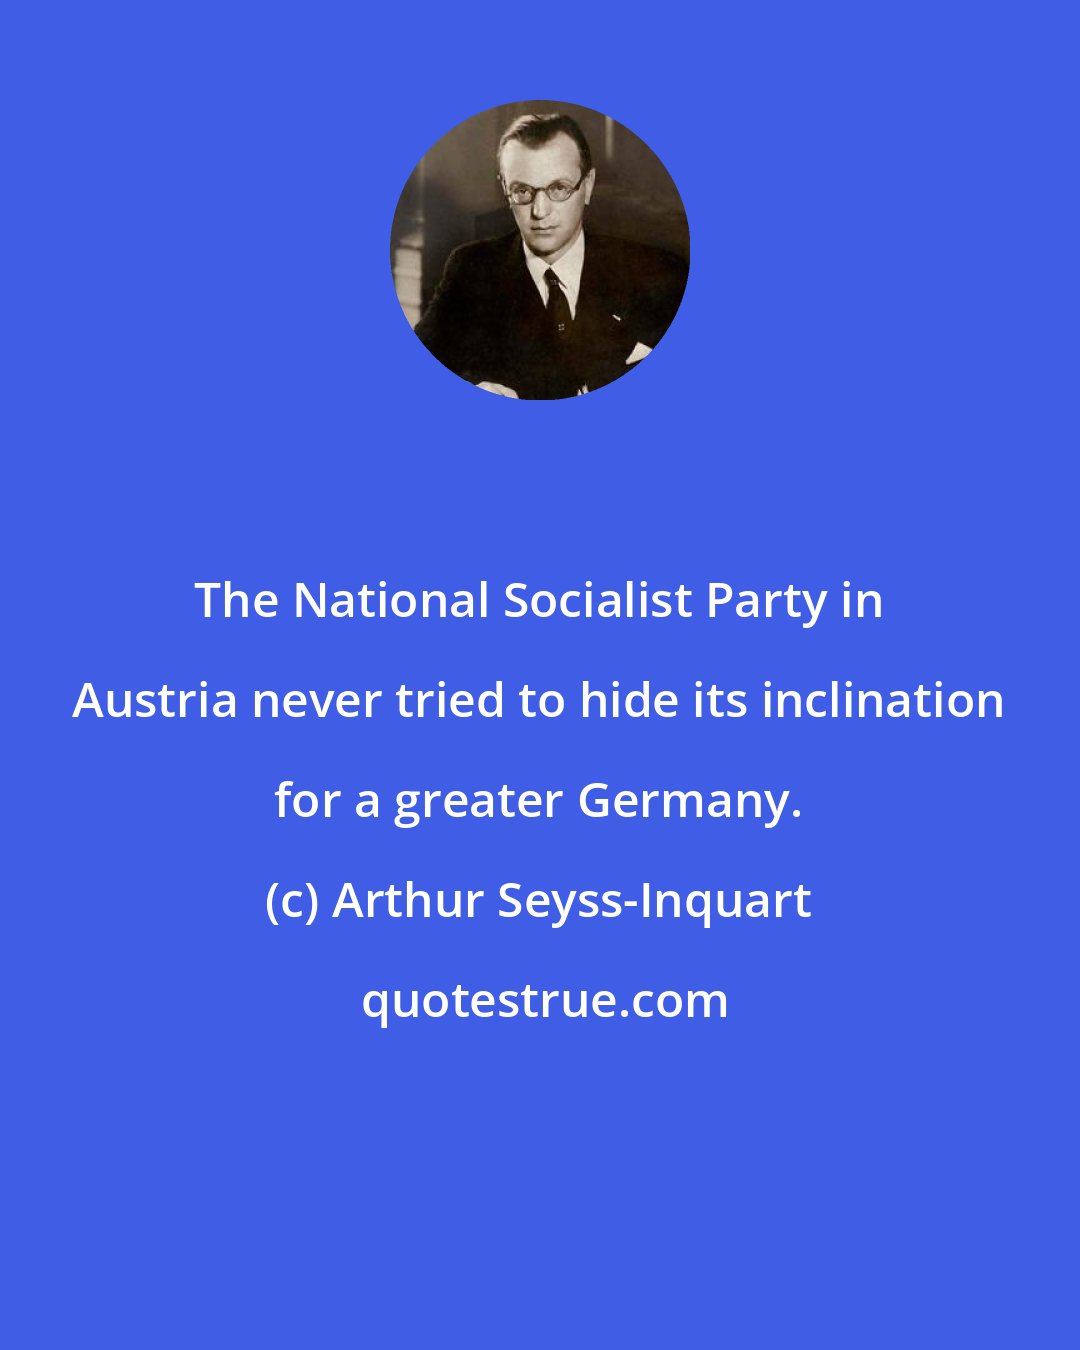 Arthur Seyss-Inquart: The National Socialist Party in Austria never tried to hide its inclination for a greater Germany.